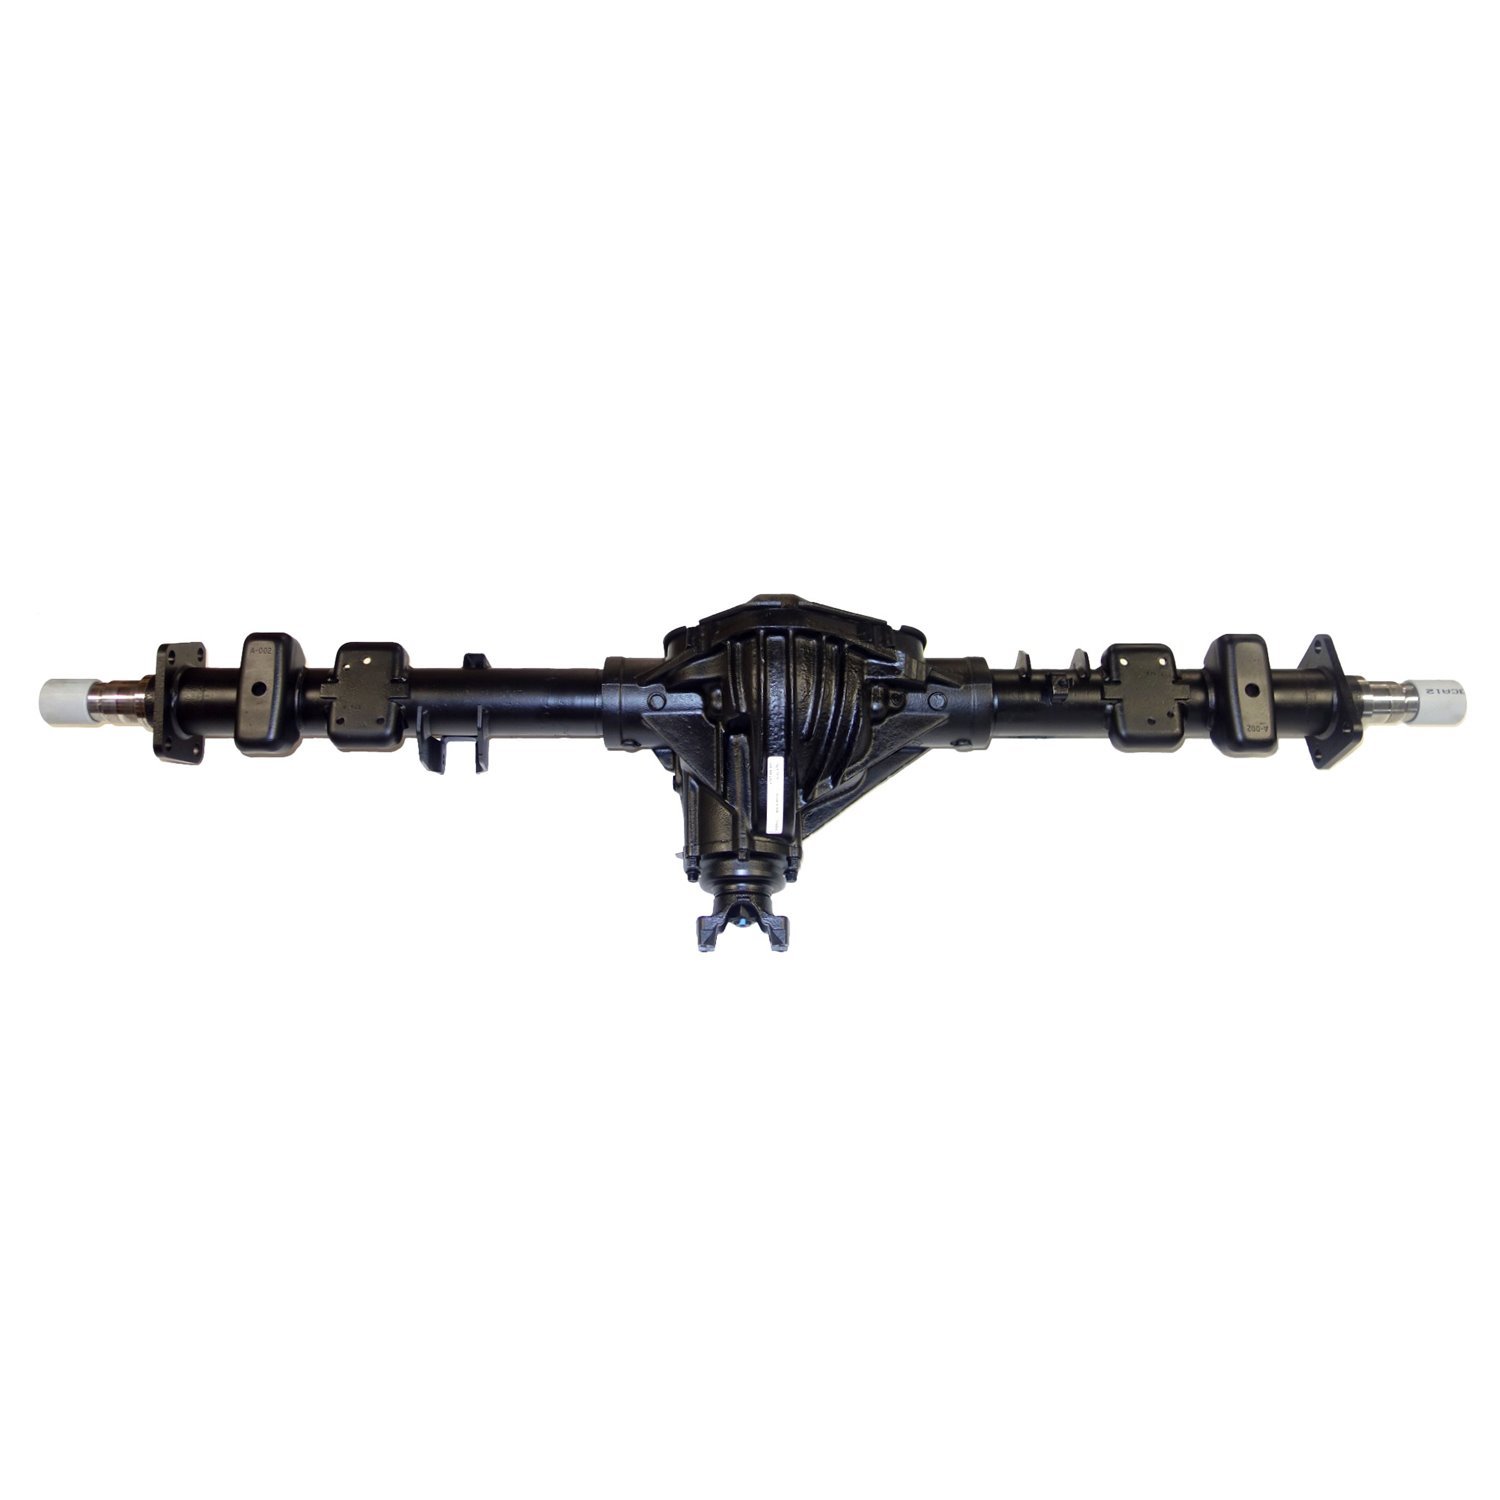 Remanufactured Axle Assy for GM 14 Bolt Truck 90-00 GM 2500 & 3500 Pickup 4.11 , 2wd, SRW